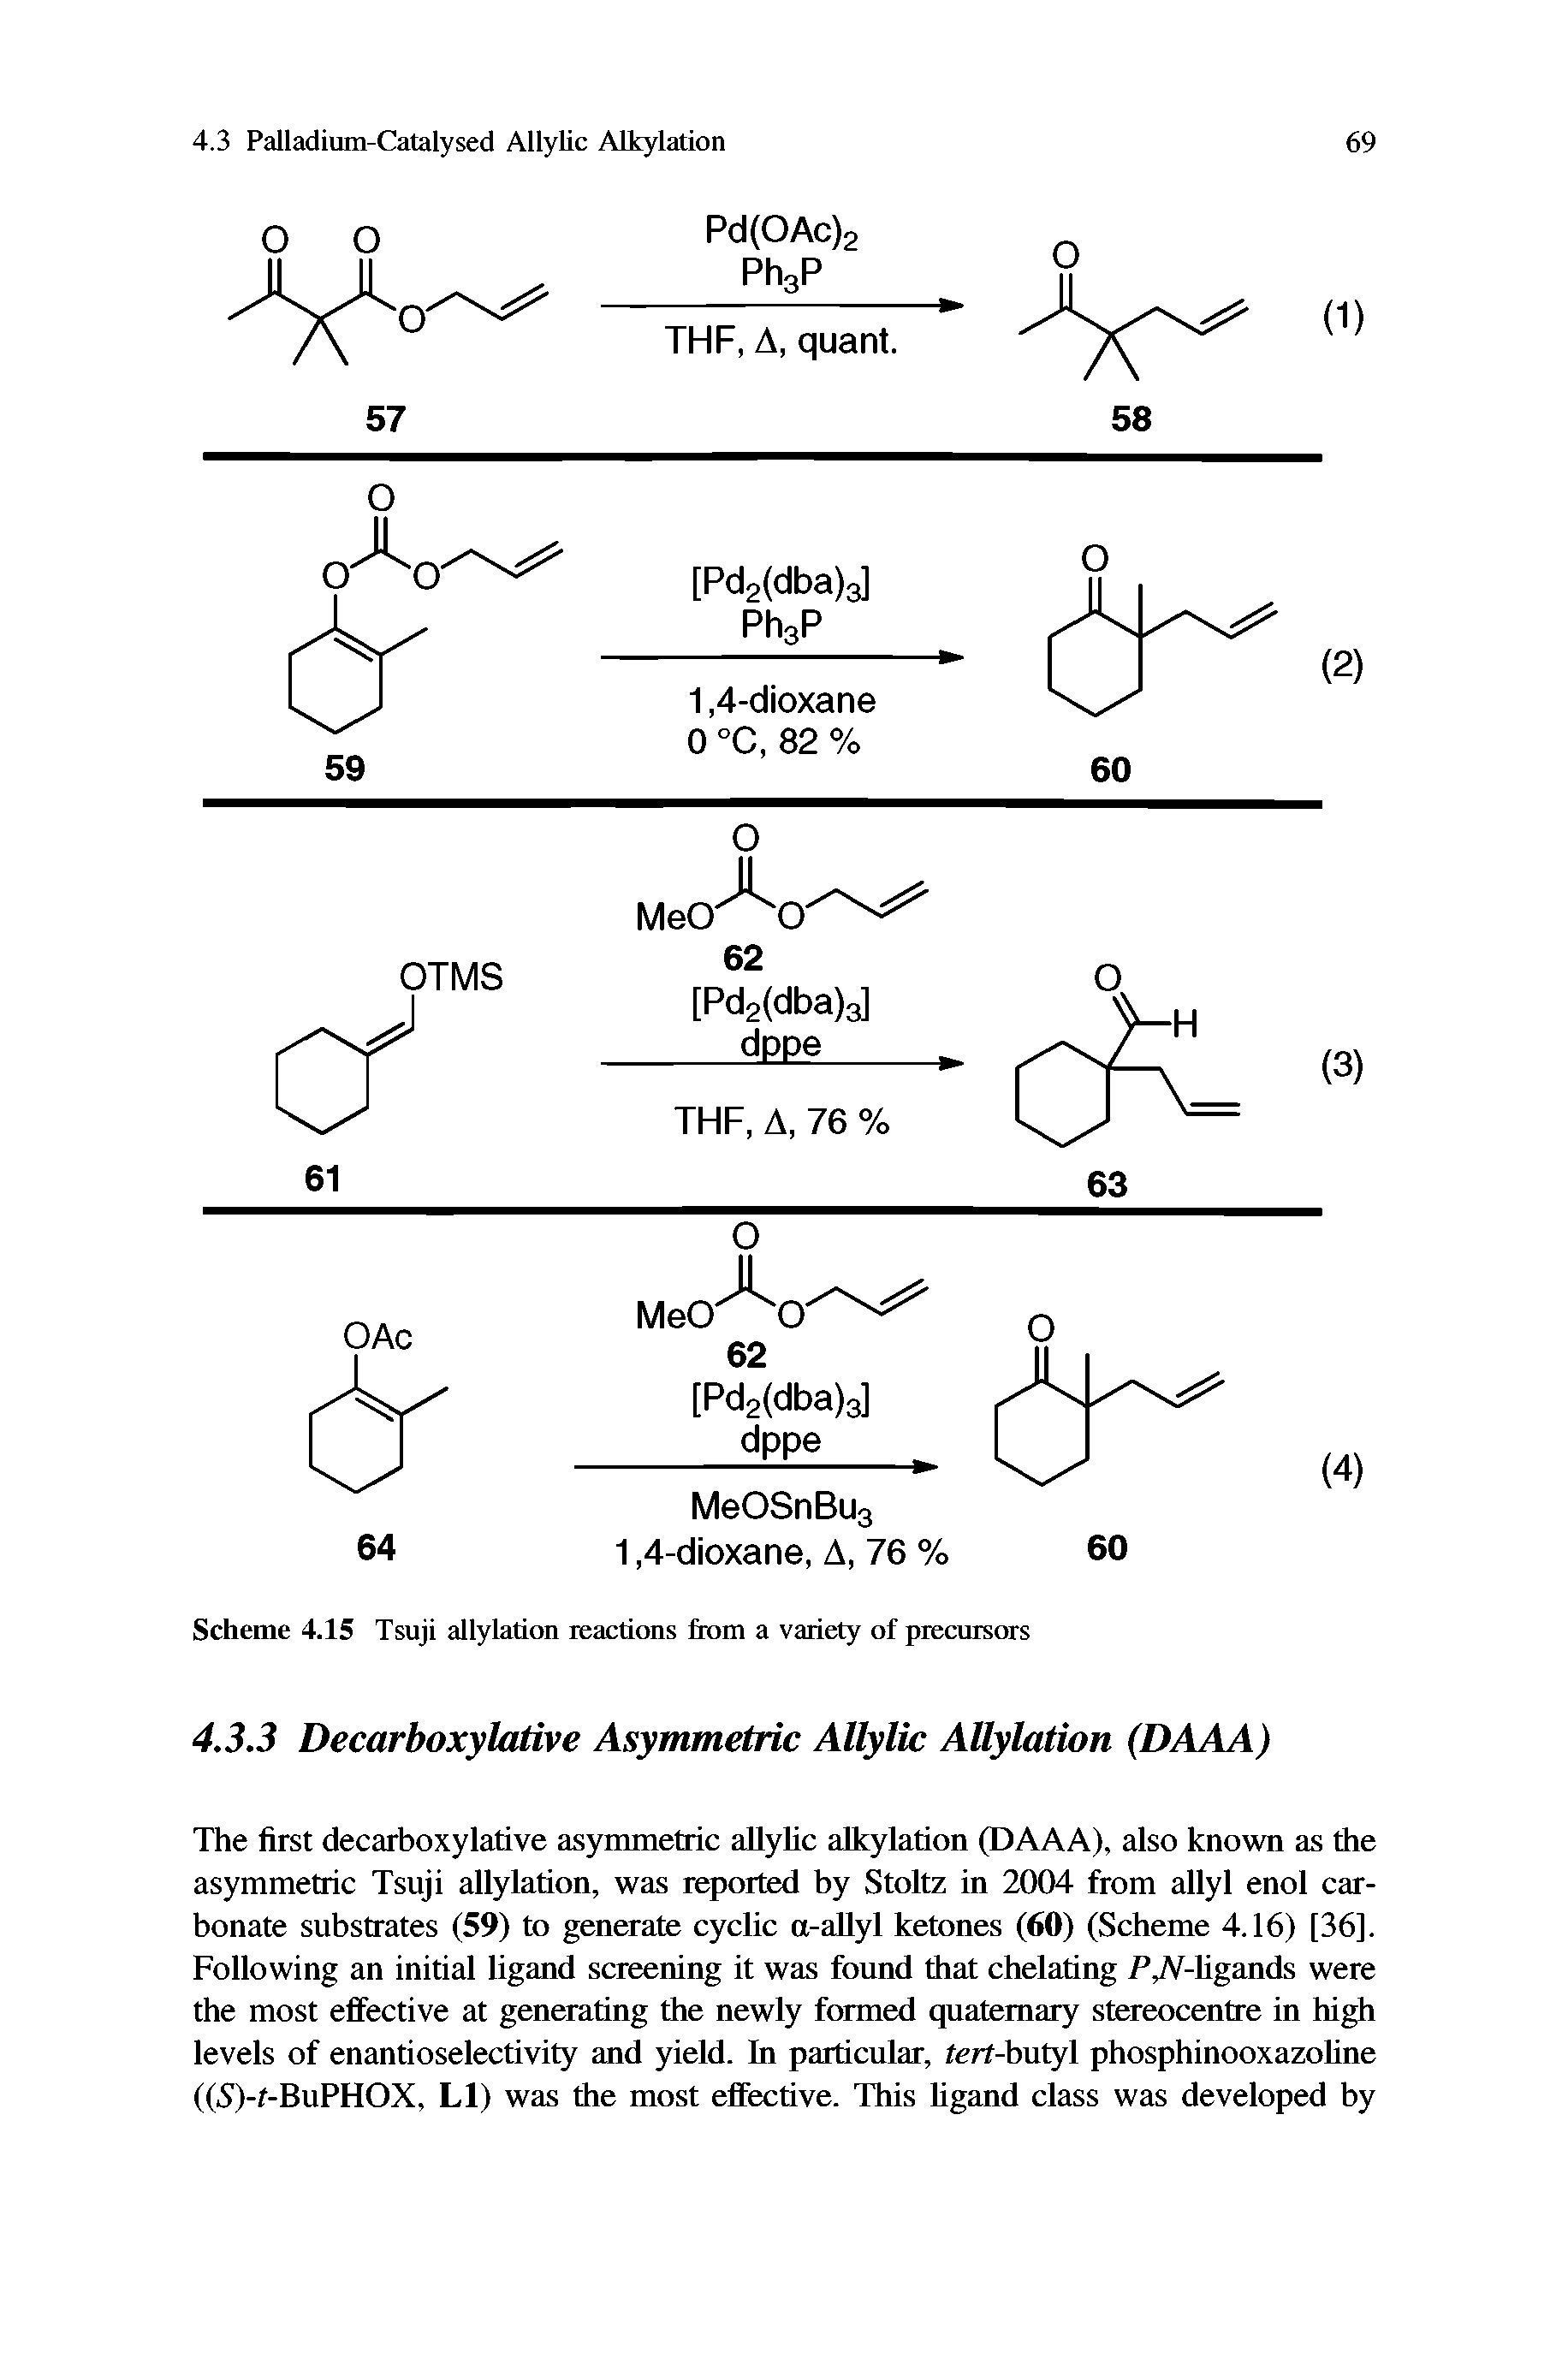 Scheme 4.15 Tsuji allylation reactions from a variety of precursors...